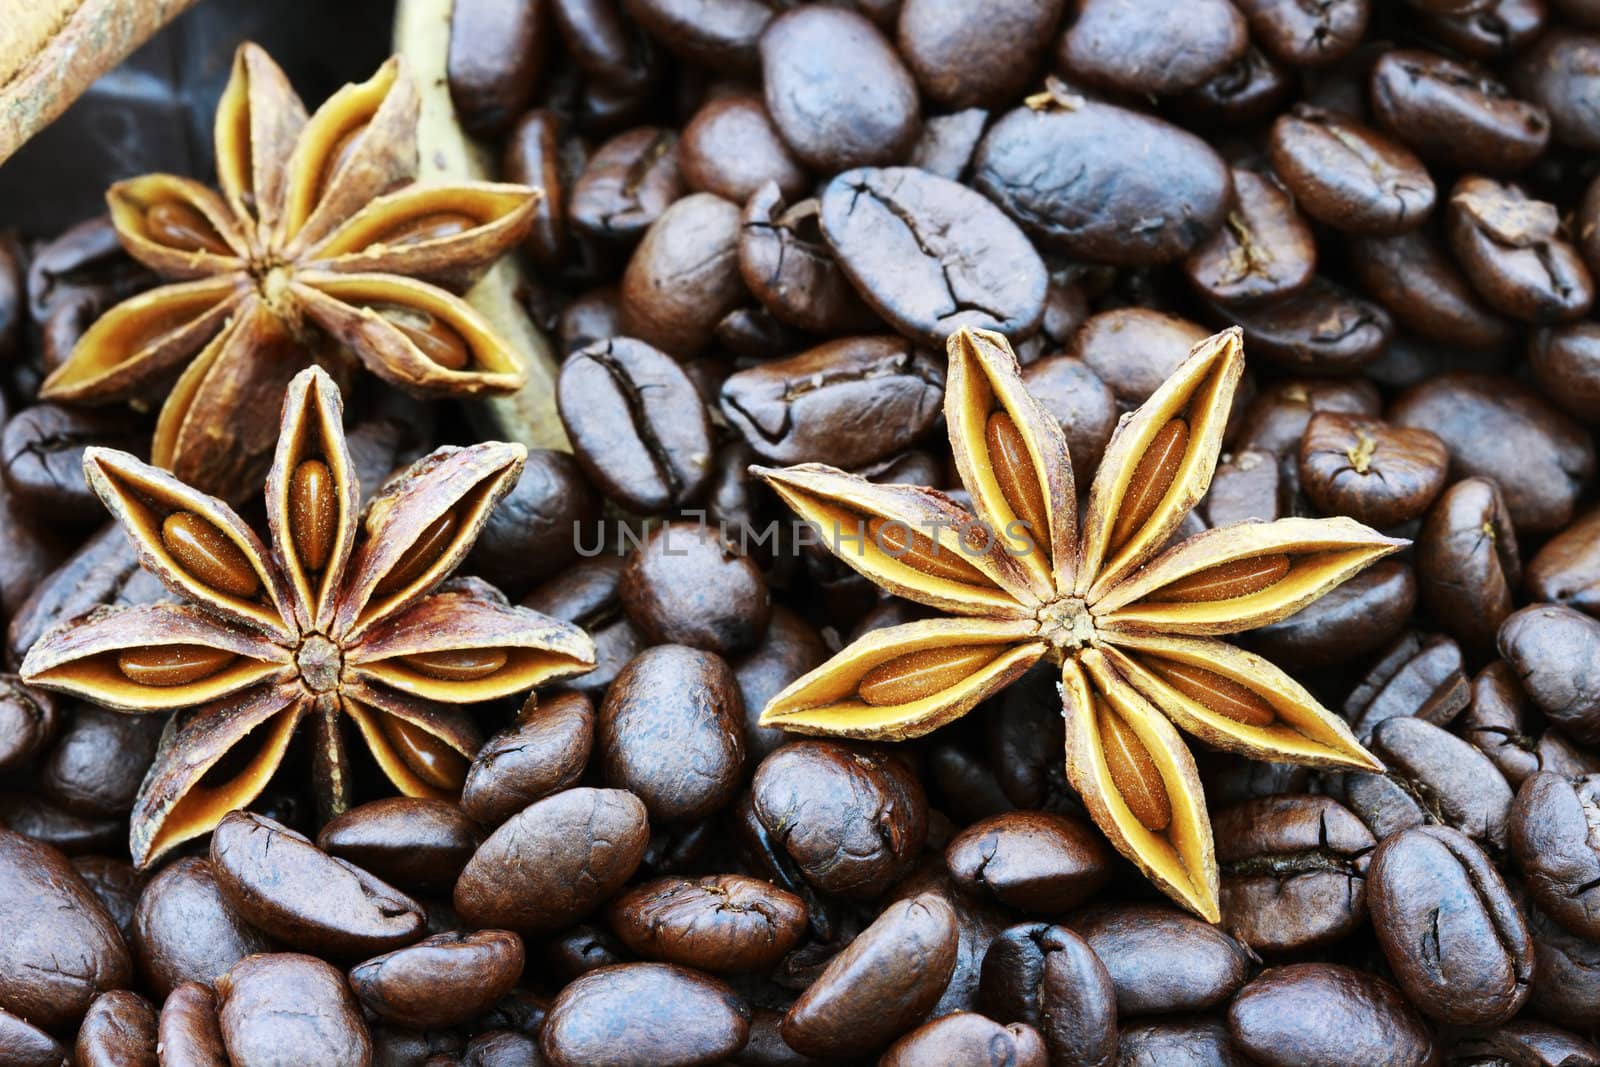 Star Anise and Coffee Beans by StephanieFrey